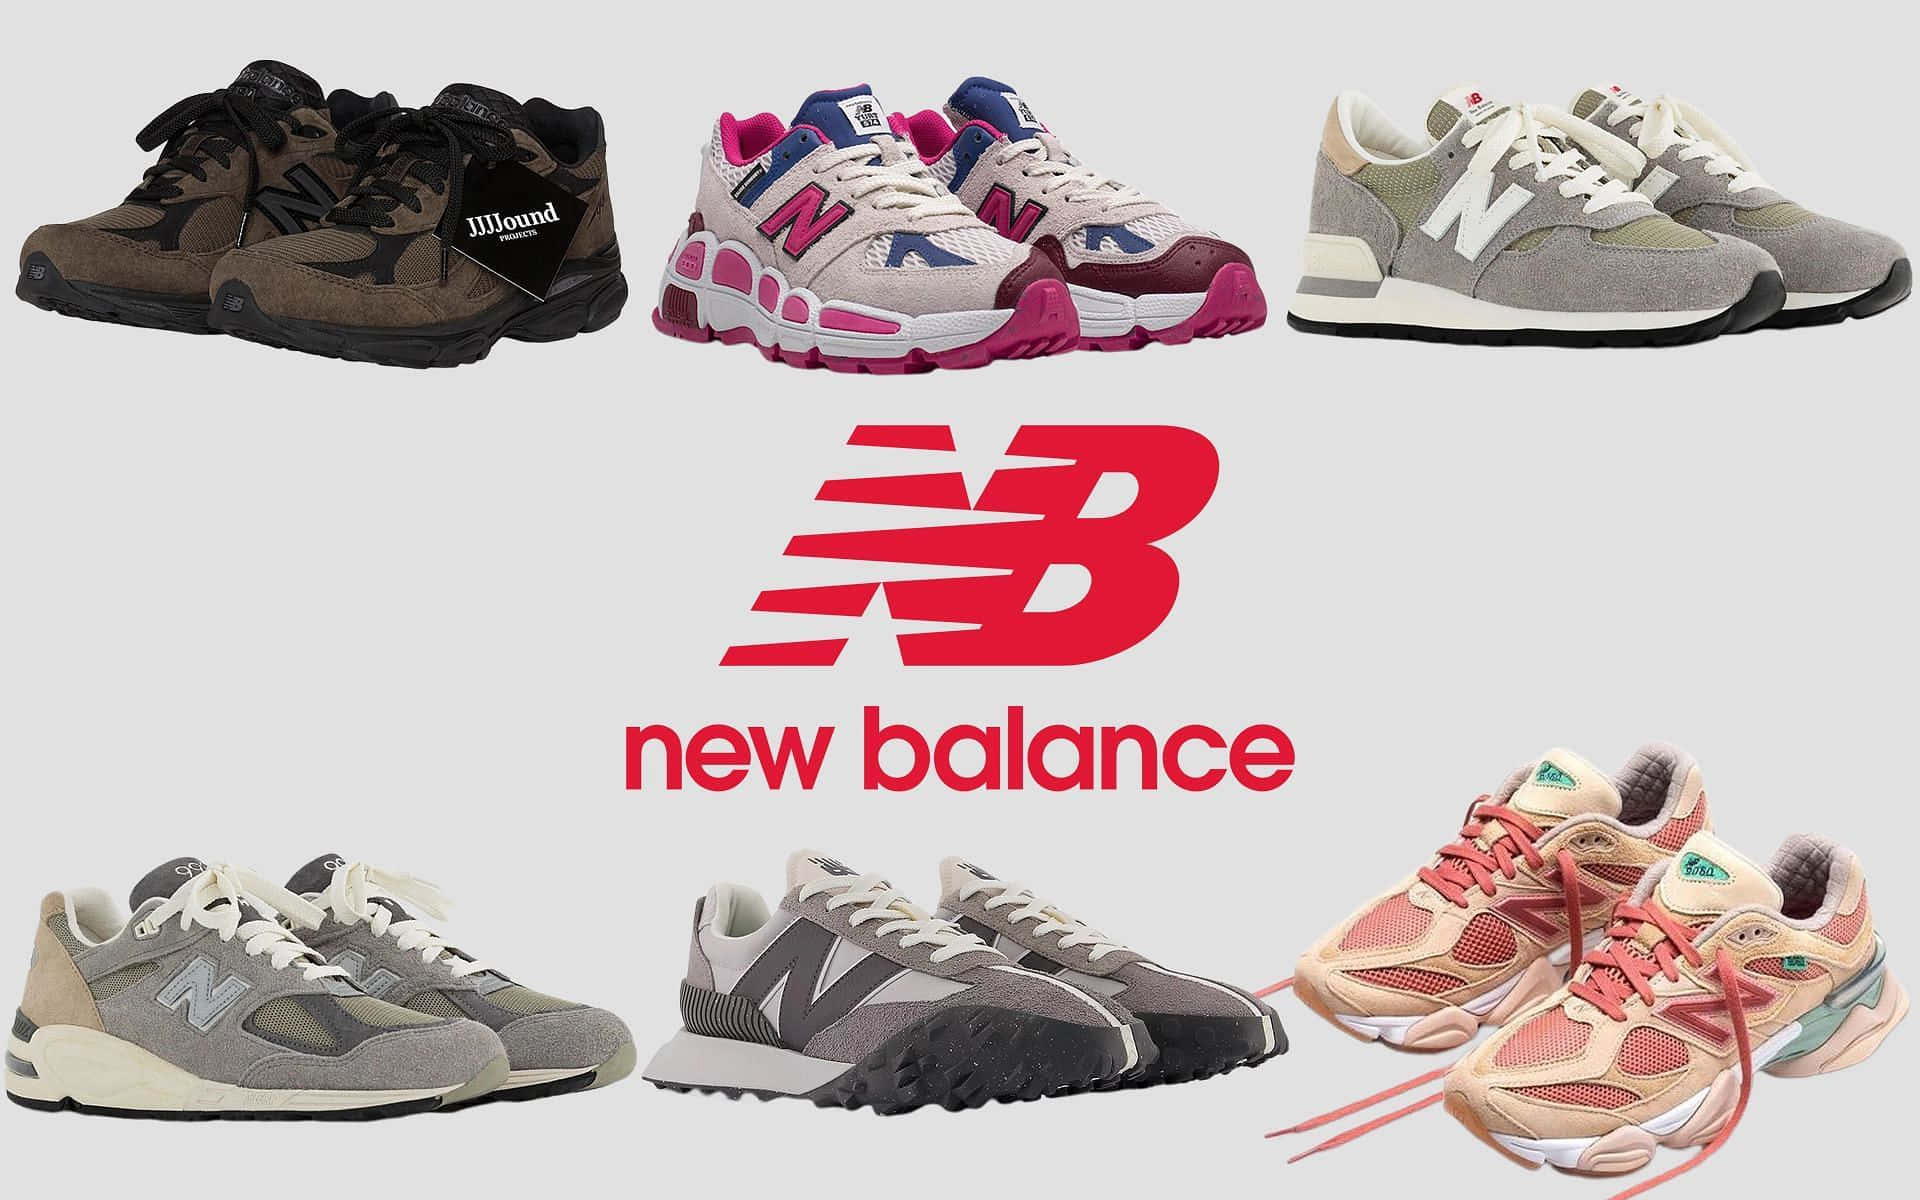 Style and Performance in one – New Balance